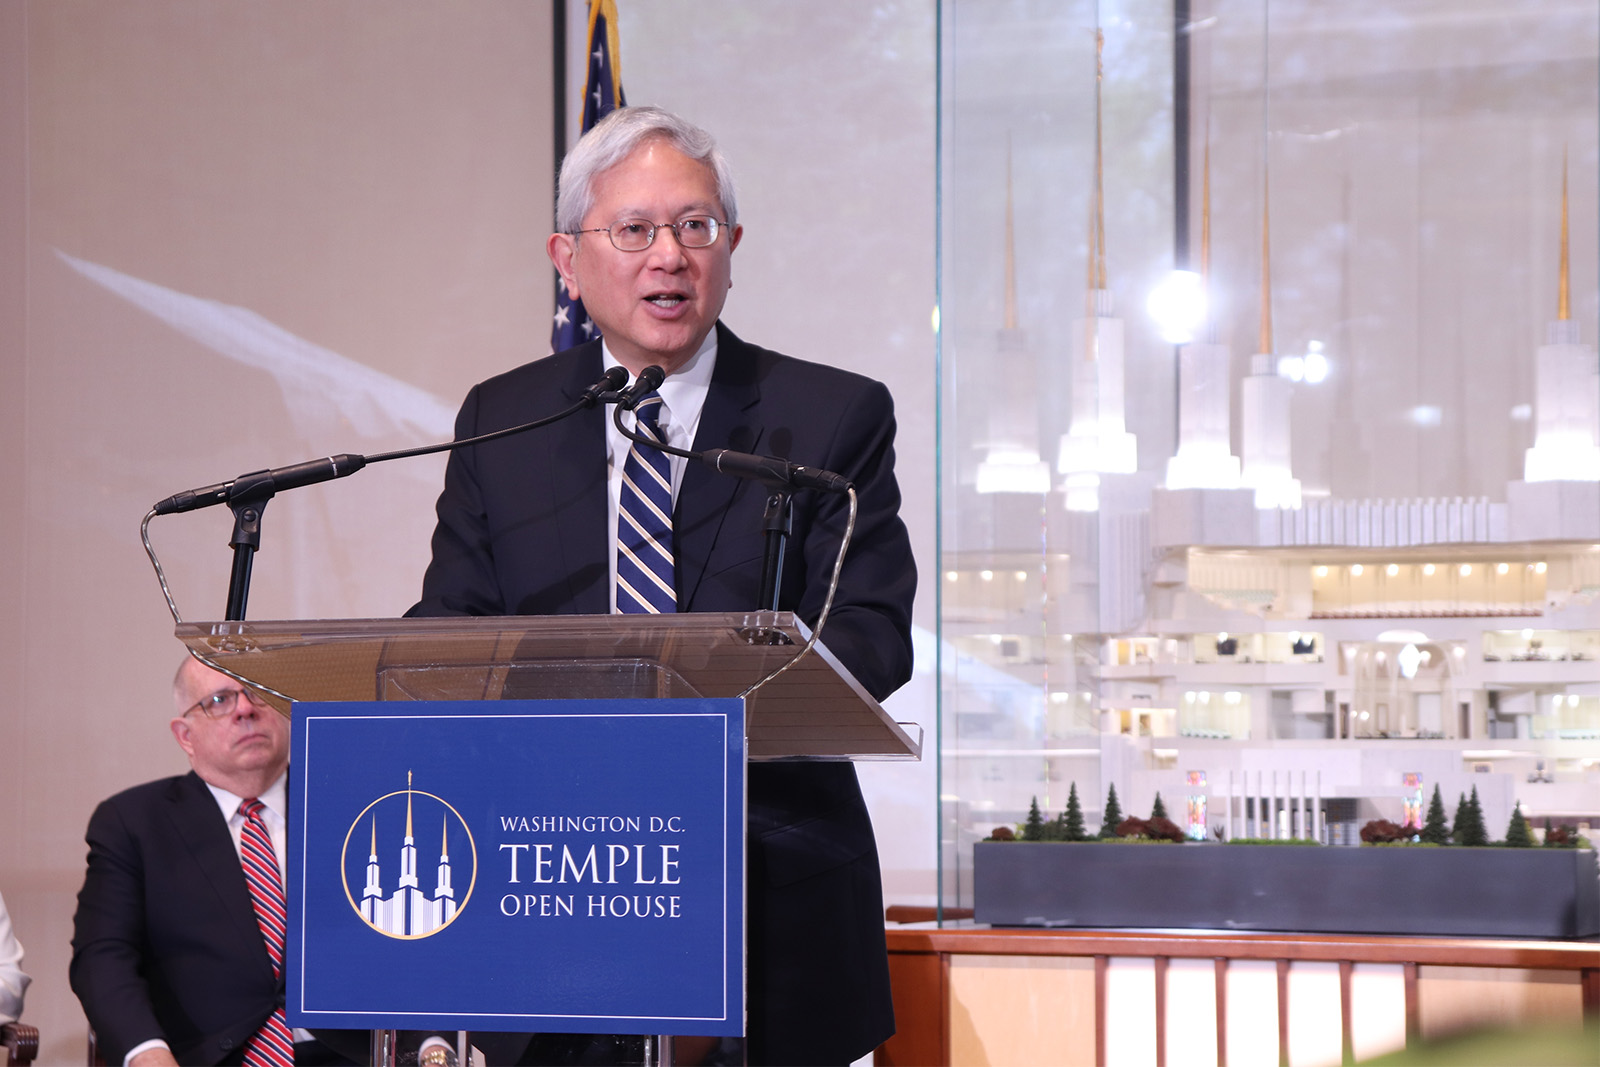 Elder Gerrit W. Gong, a member of the Twelve Apostles, the second highest LDS leadership body, speaks during a D.C. Temple Open House press conference Monday, April 18, 2022, in Washington, D.C. RNS photo by Adelle M. Banks